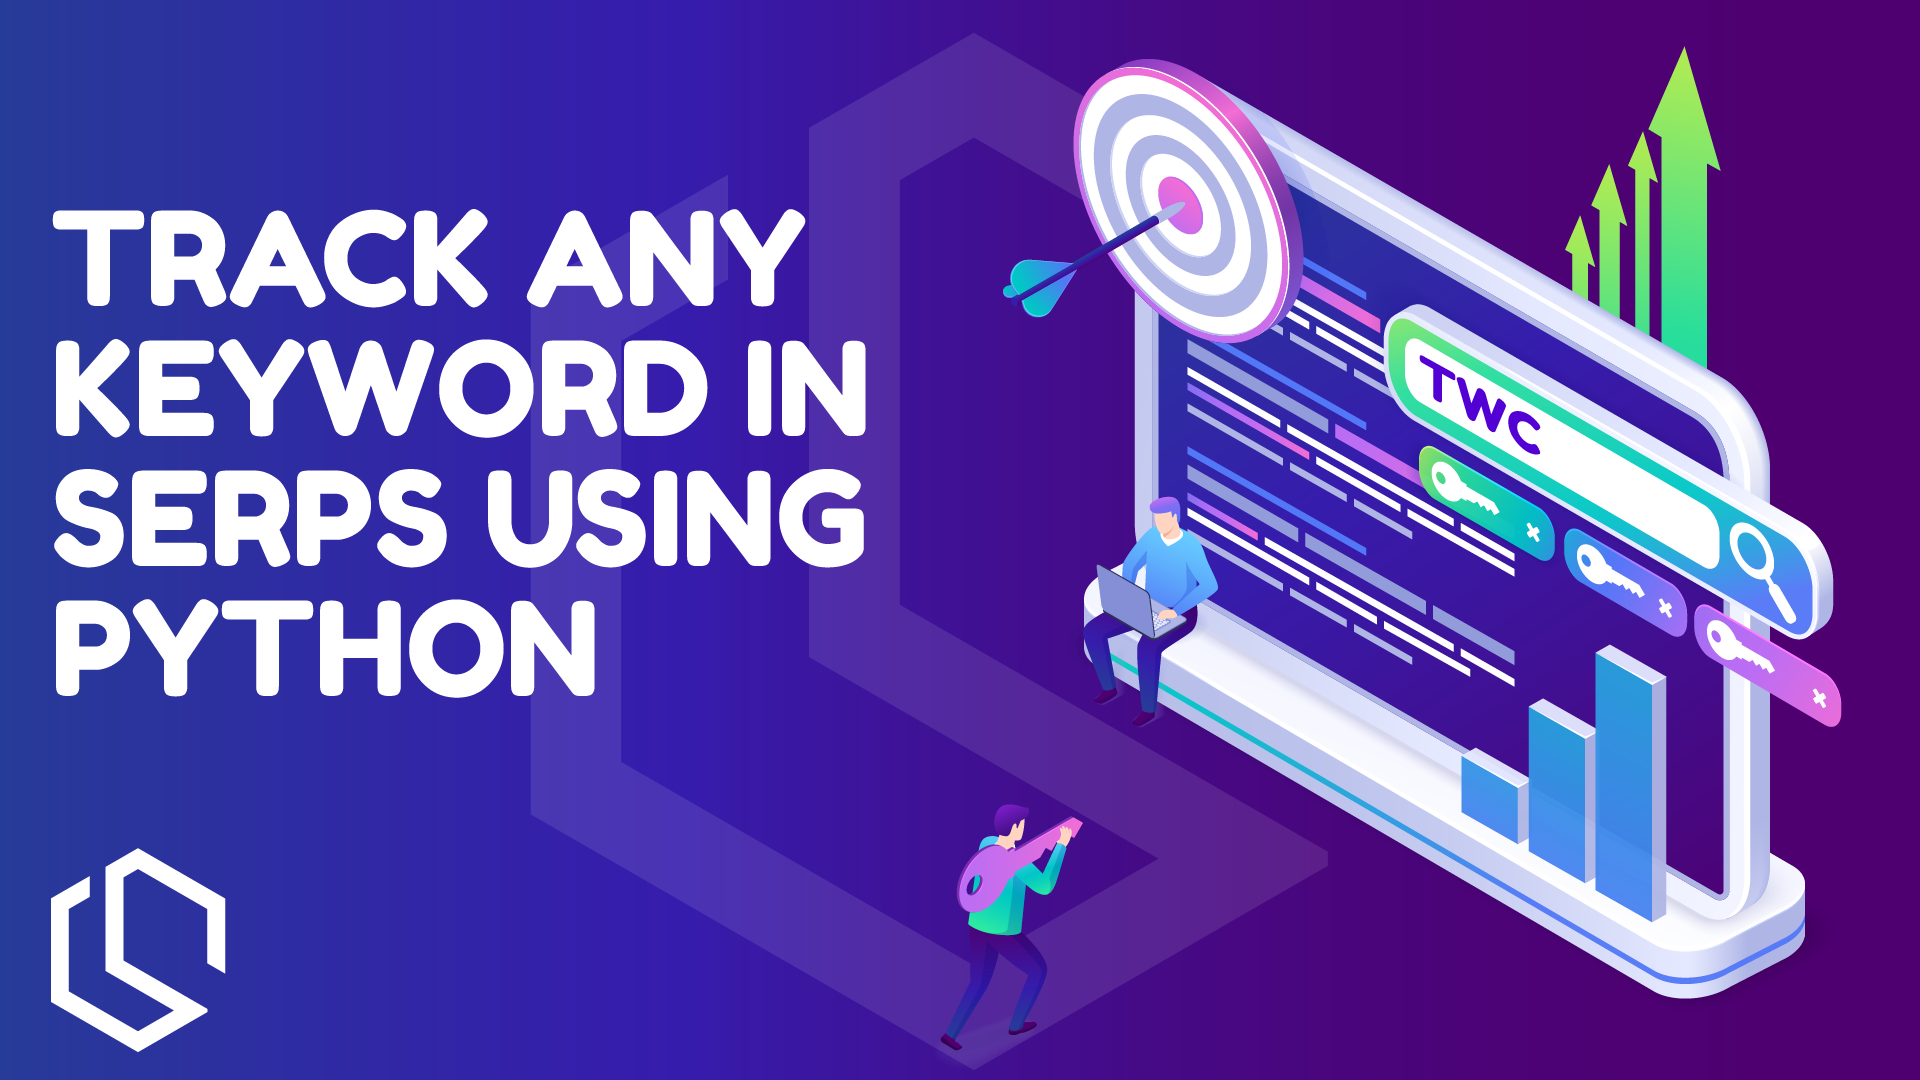 How to track the rank of keywords on Google using Python